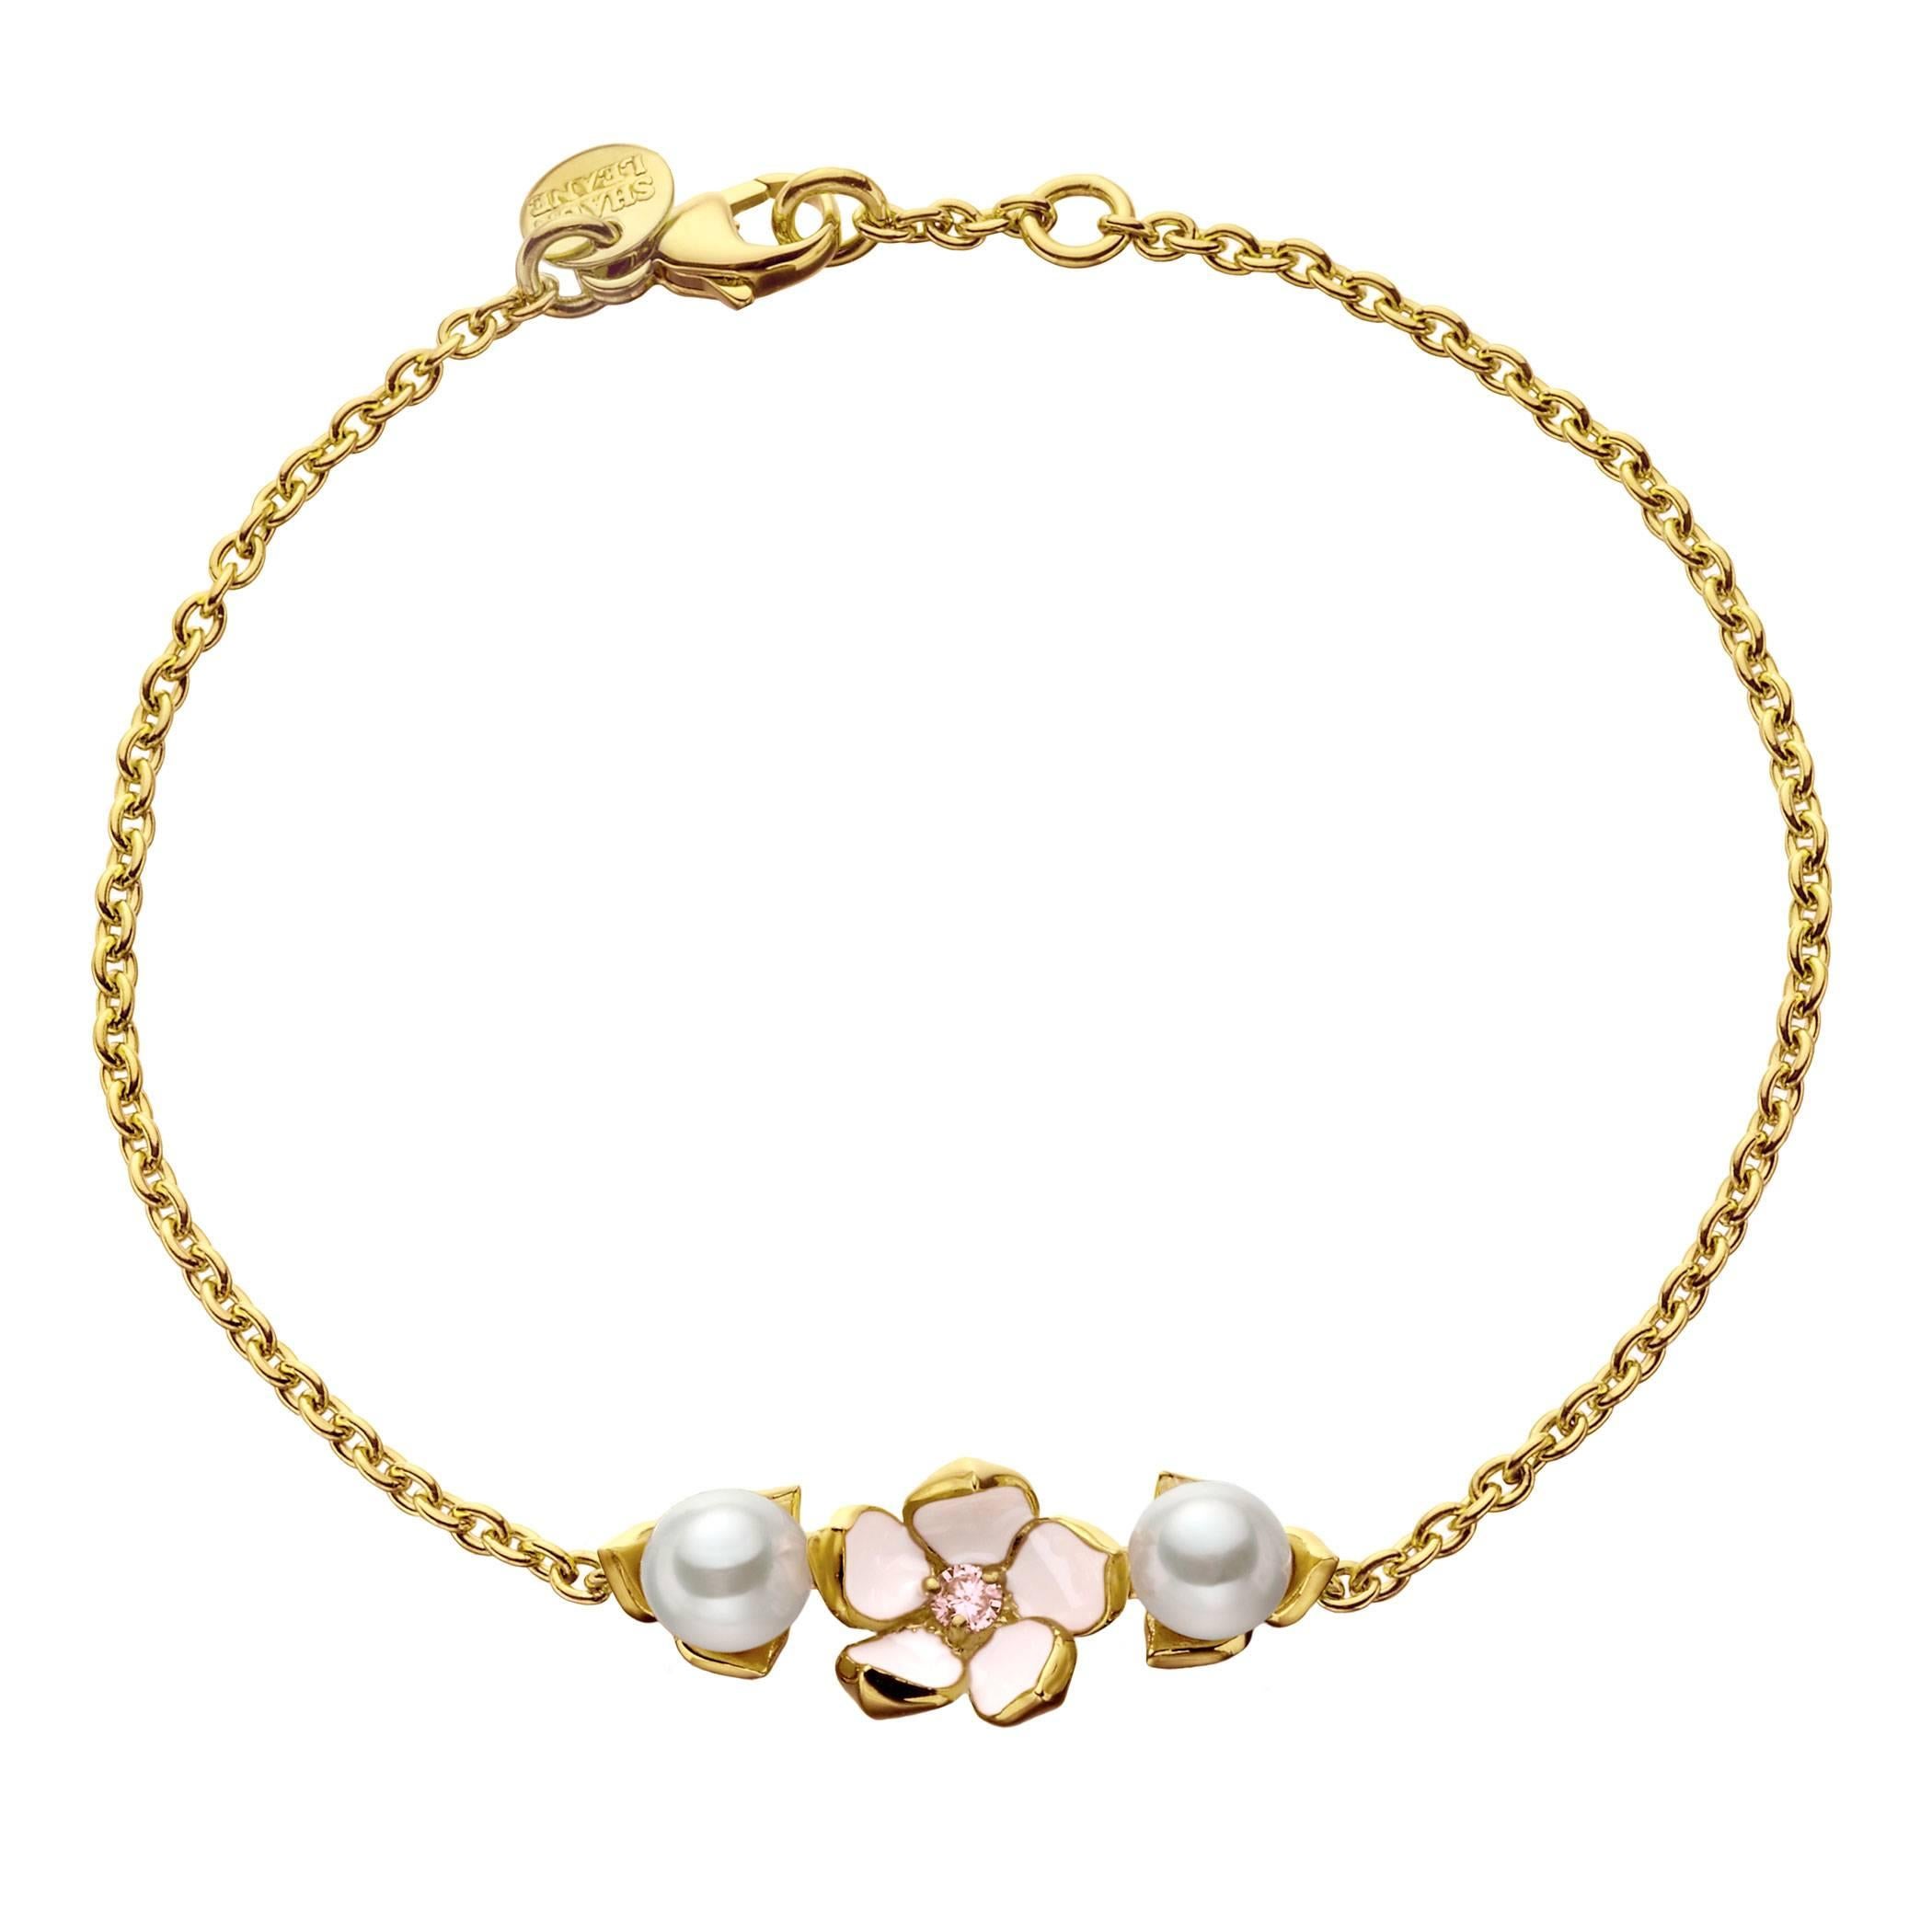 Shaun Leane Single Flower Bracelet in Yellow Gold Vermeil with Diamond and Pearl